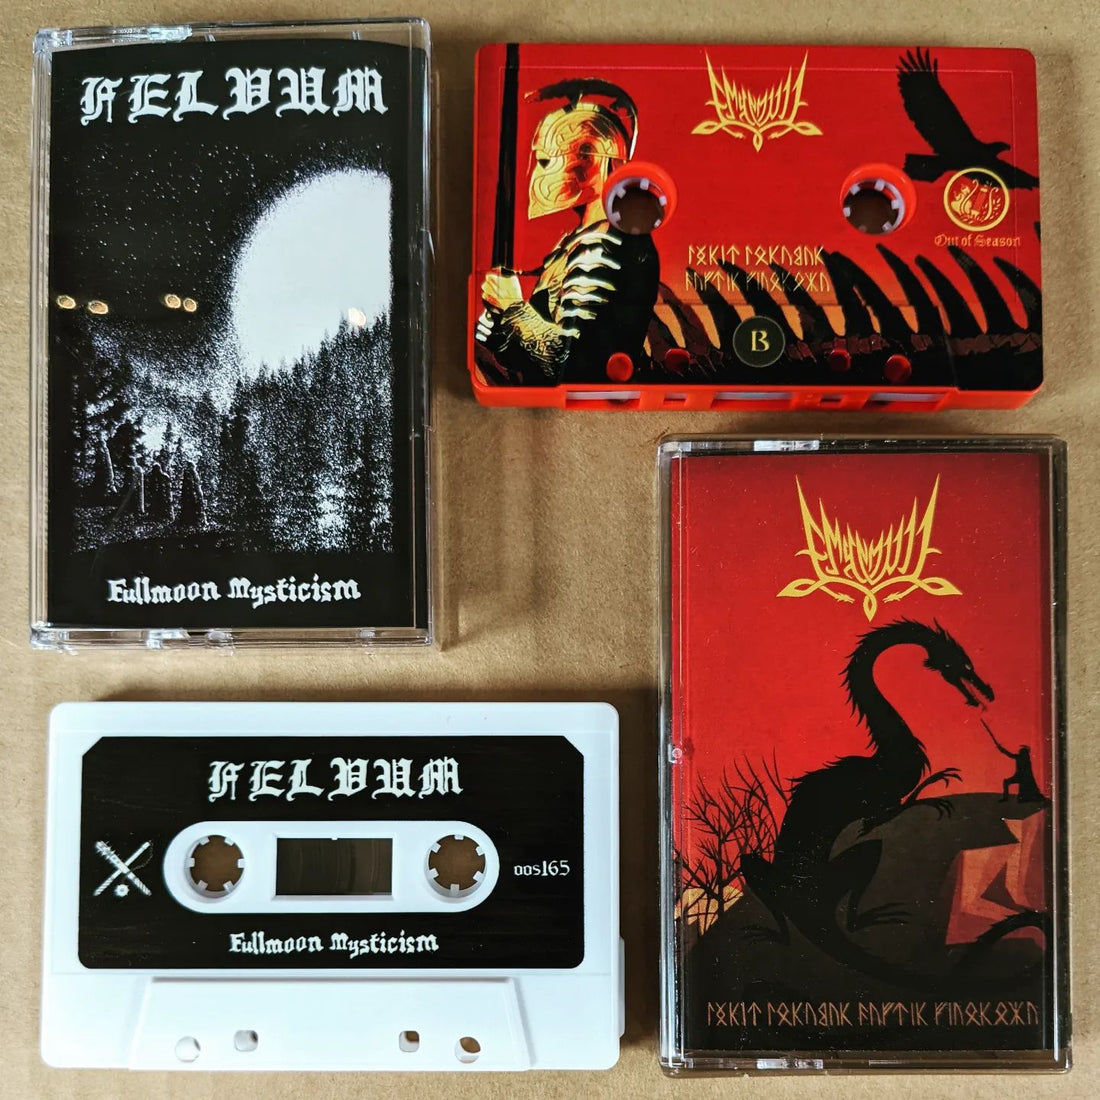 Two new cassettes are releasing this Tuesday April 12